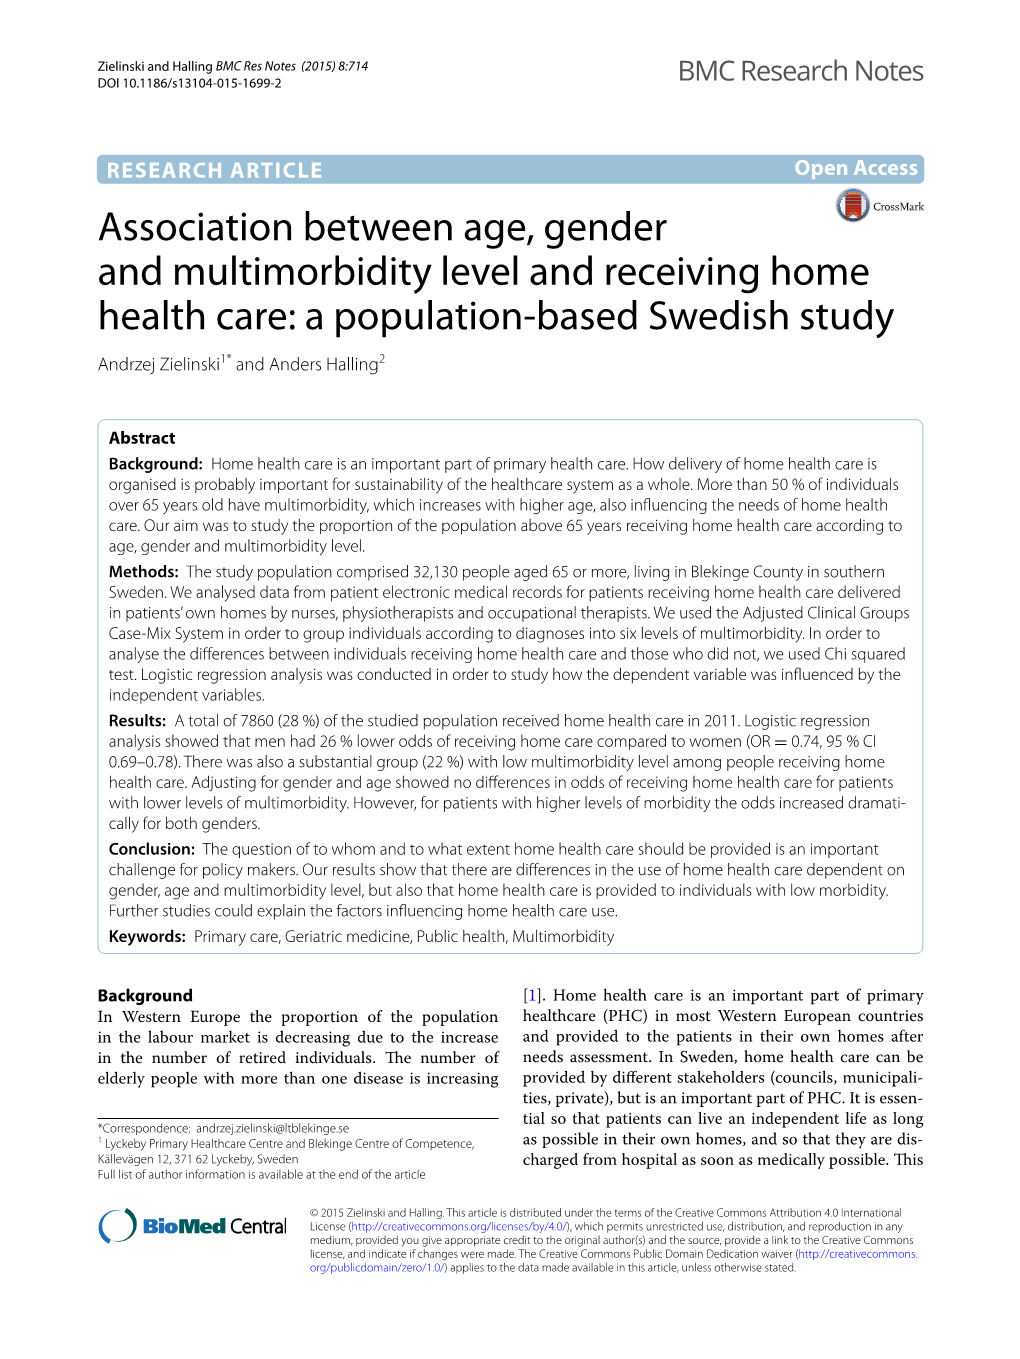 Association Between Age, Gender and Multimorbidity Level and Receiving Home Health Care: a Population‑Based Swedish Study Andrzej Zielinski1* and Anders Halling2